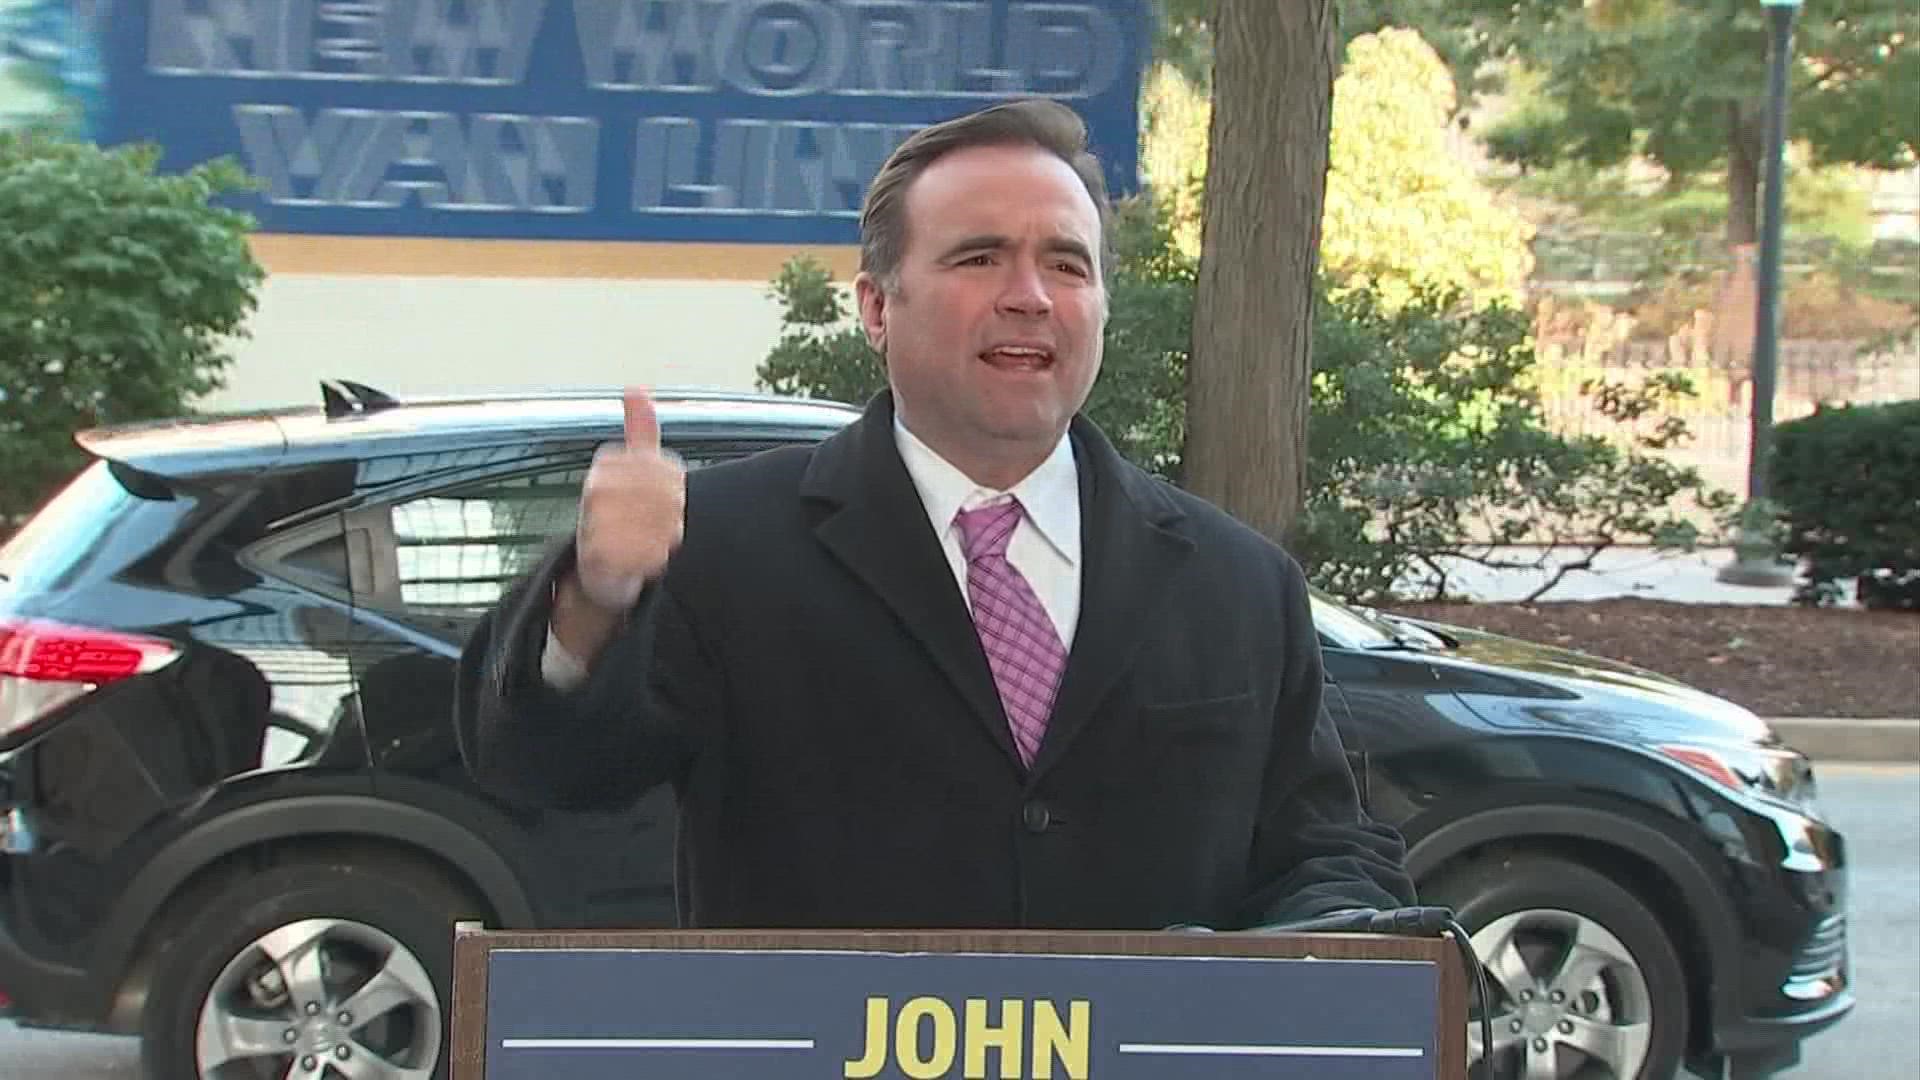 Democrat candidate John Cranley blames the PUCO for allowing House Bill 6 to become law.